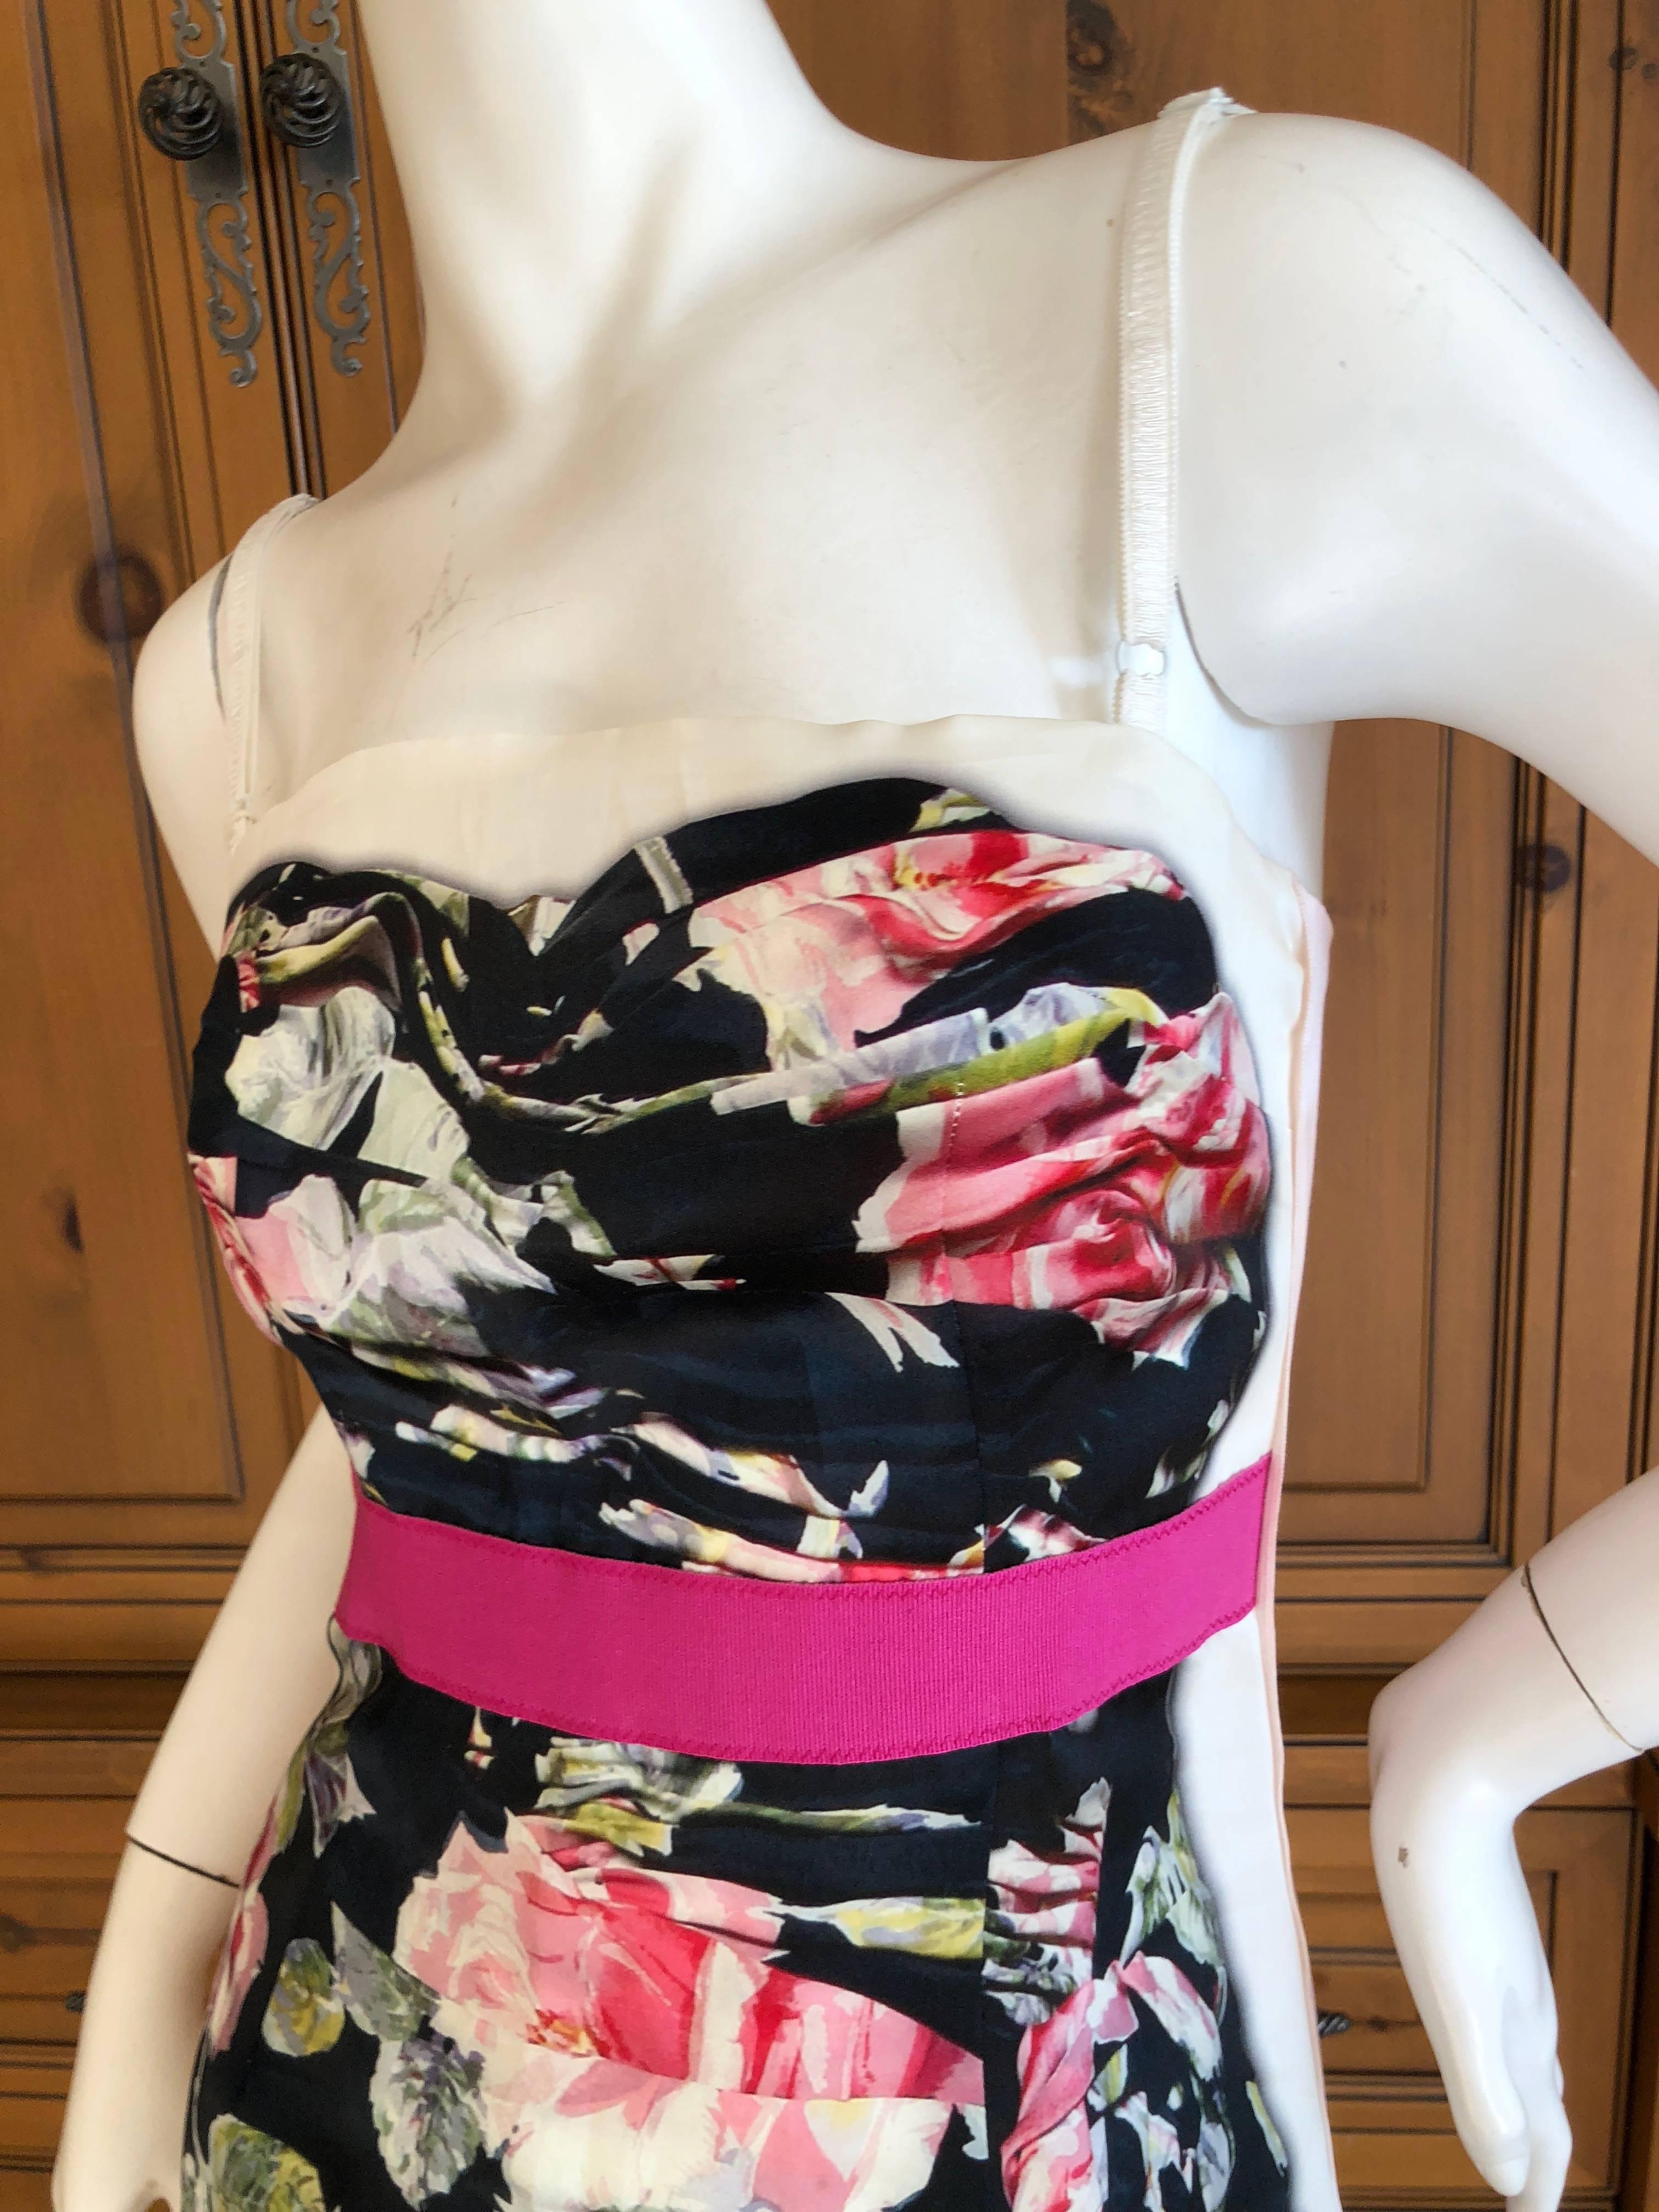 D&G by Dolce & Gabbana Sweet Floral Cocktail Dress New with Tags In New Condition For Sale In Cloverdale, CA